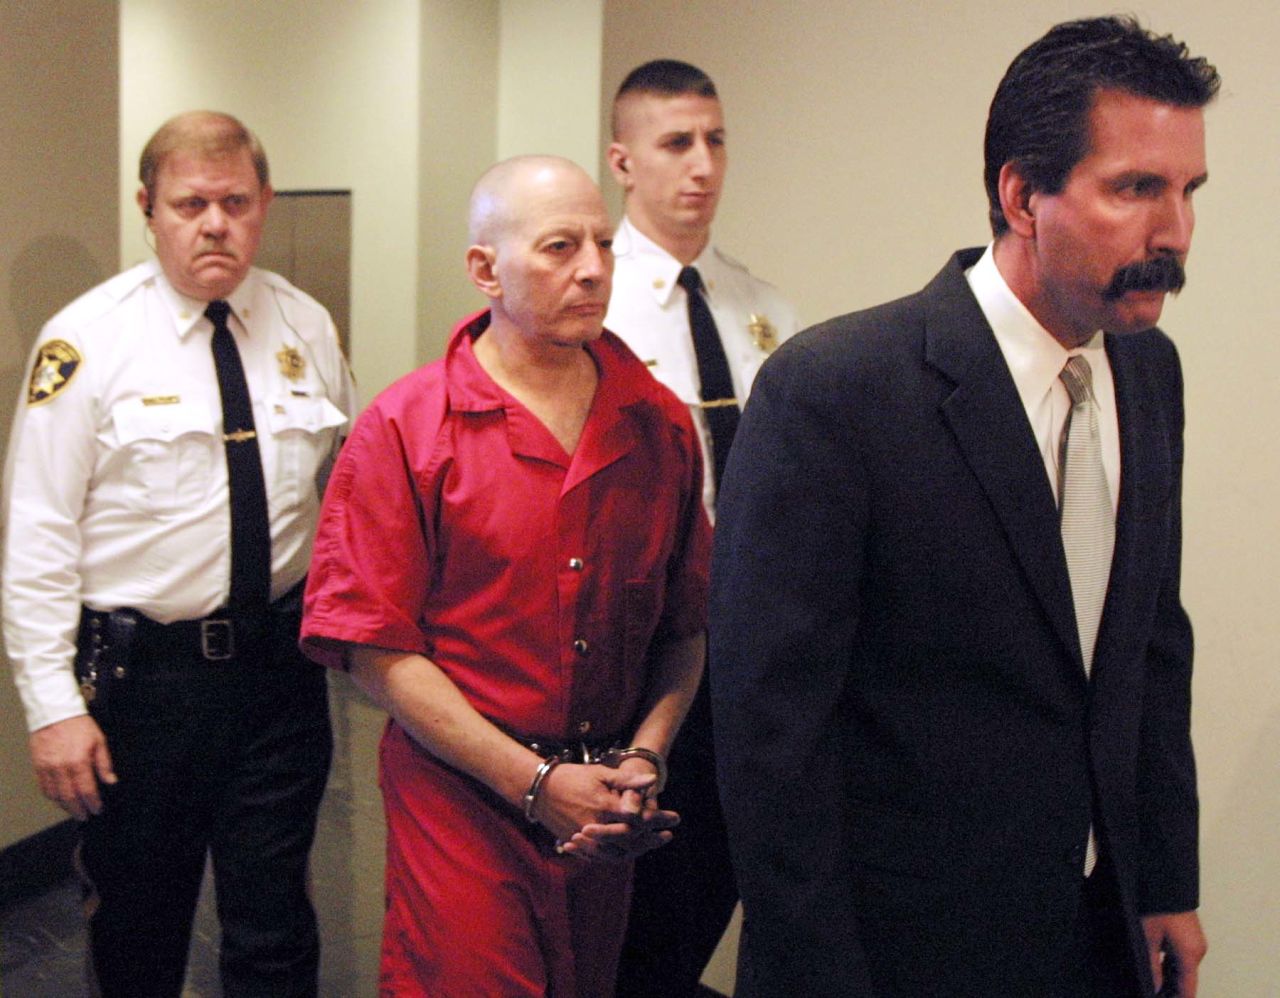 Durst is escorted to a Northampton County courtroom before a hearing in December 2001.